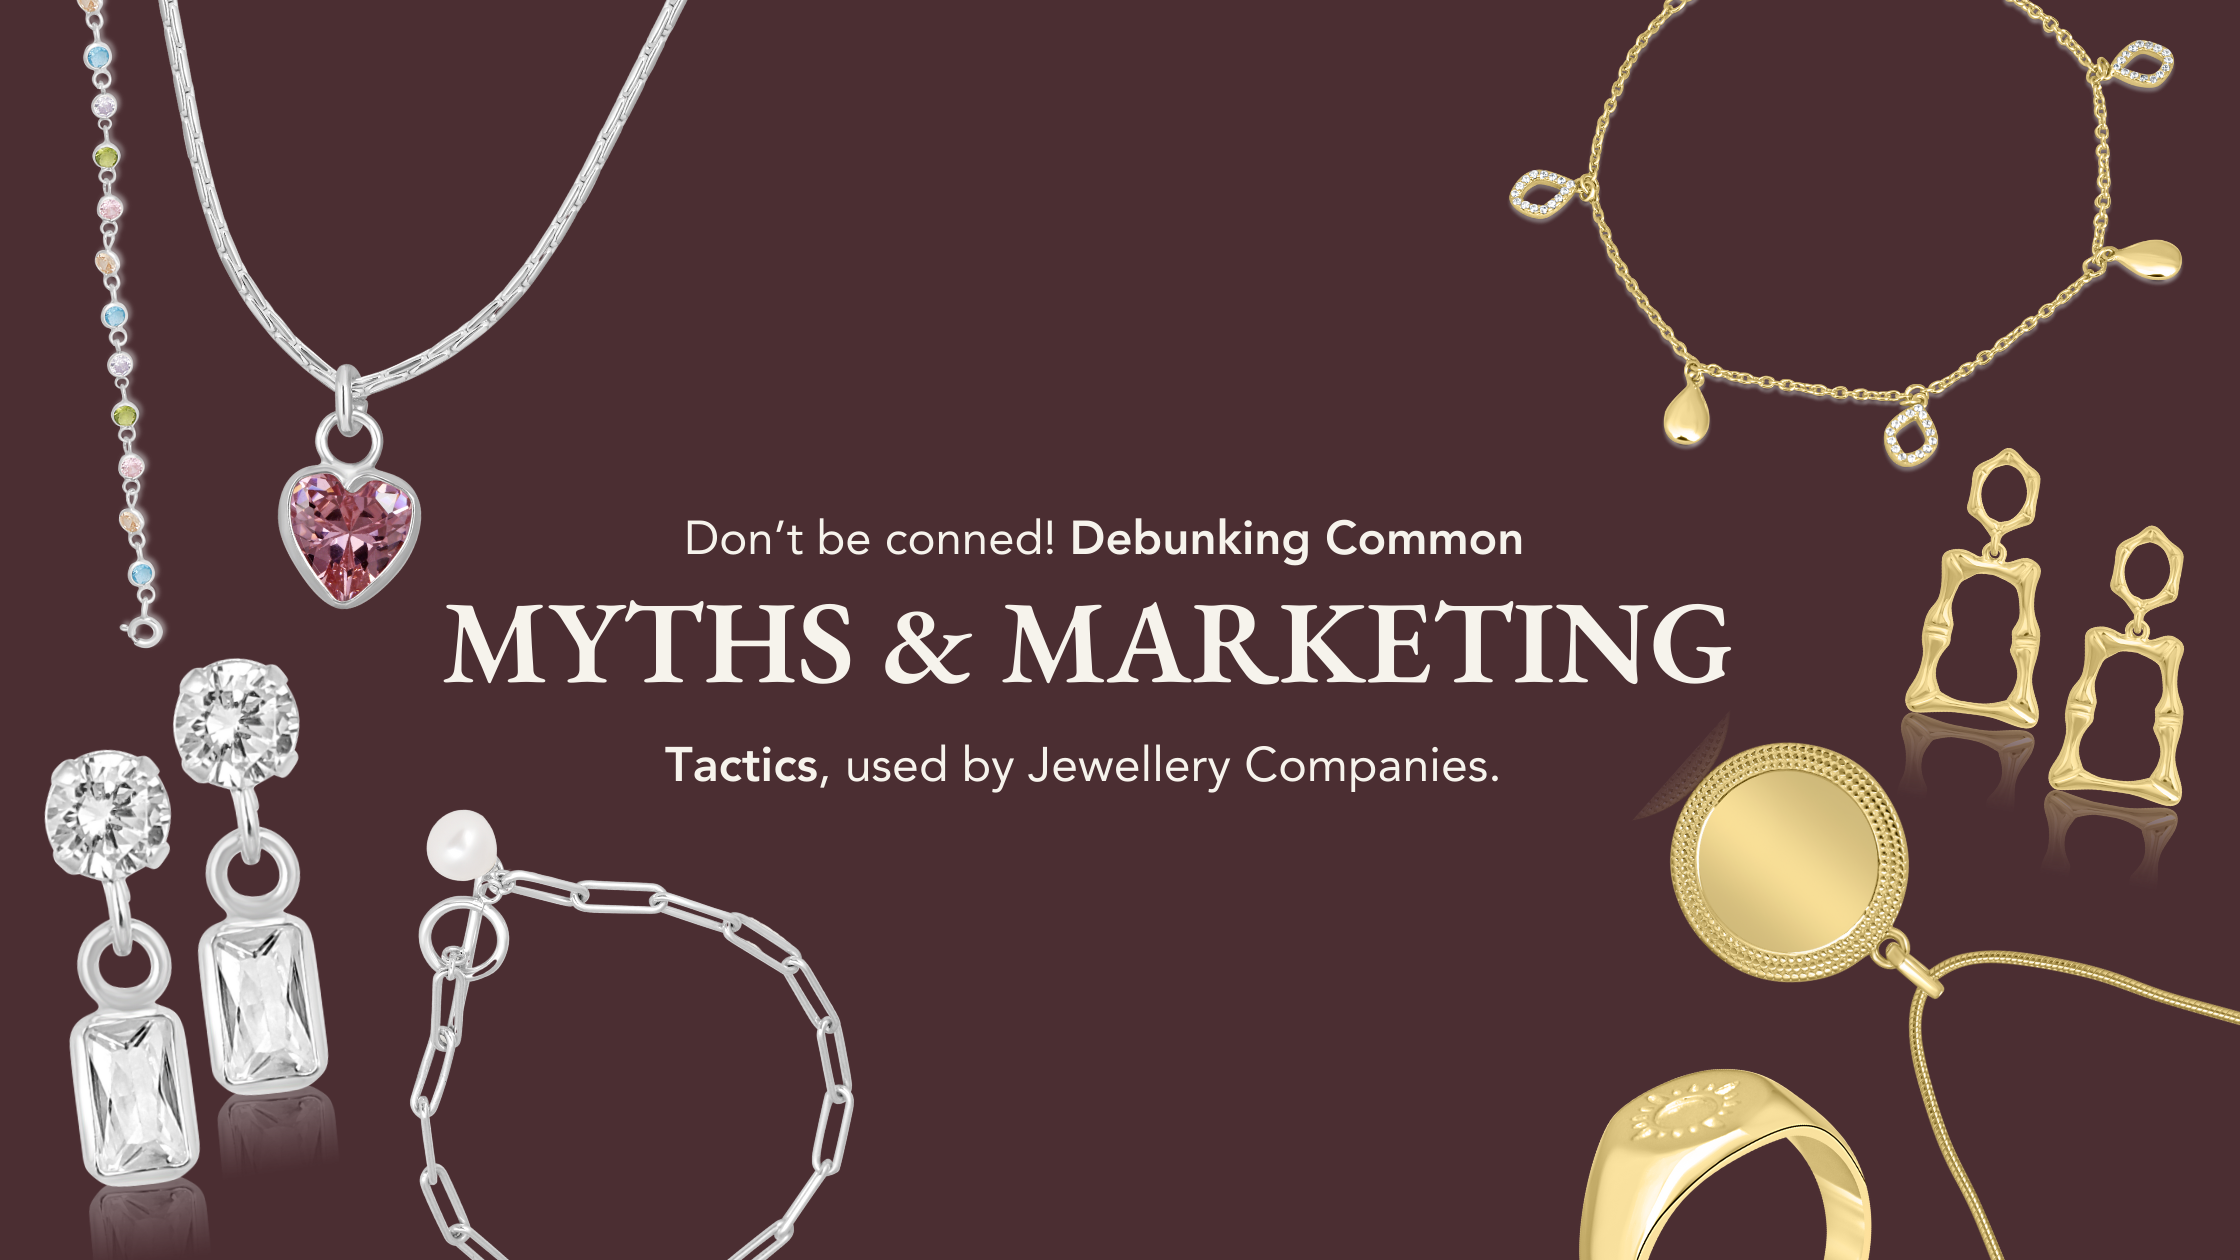 Don't be conned: Debunking Jewellery Myths & Misleading Marketing Tactics!